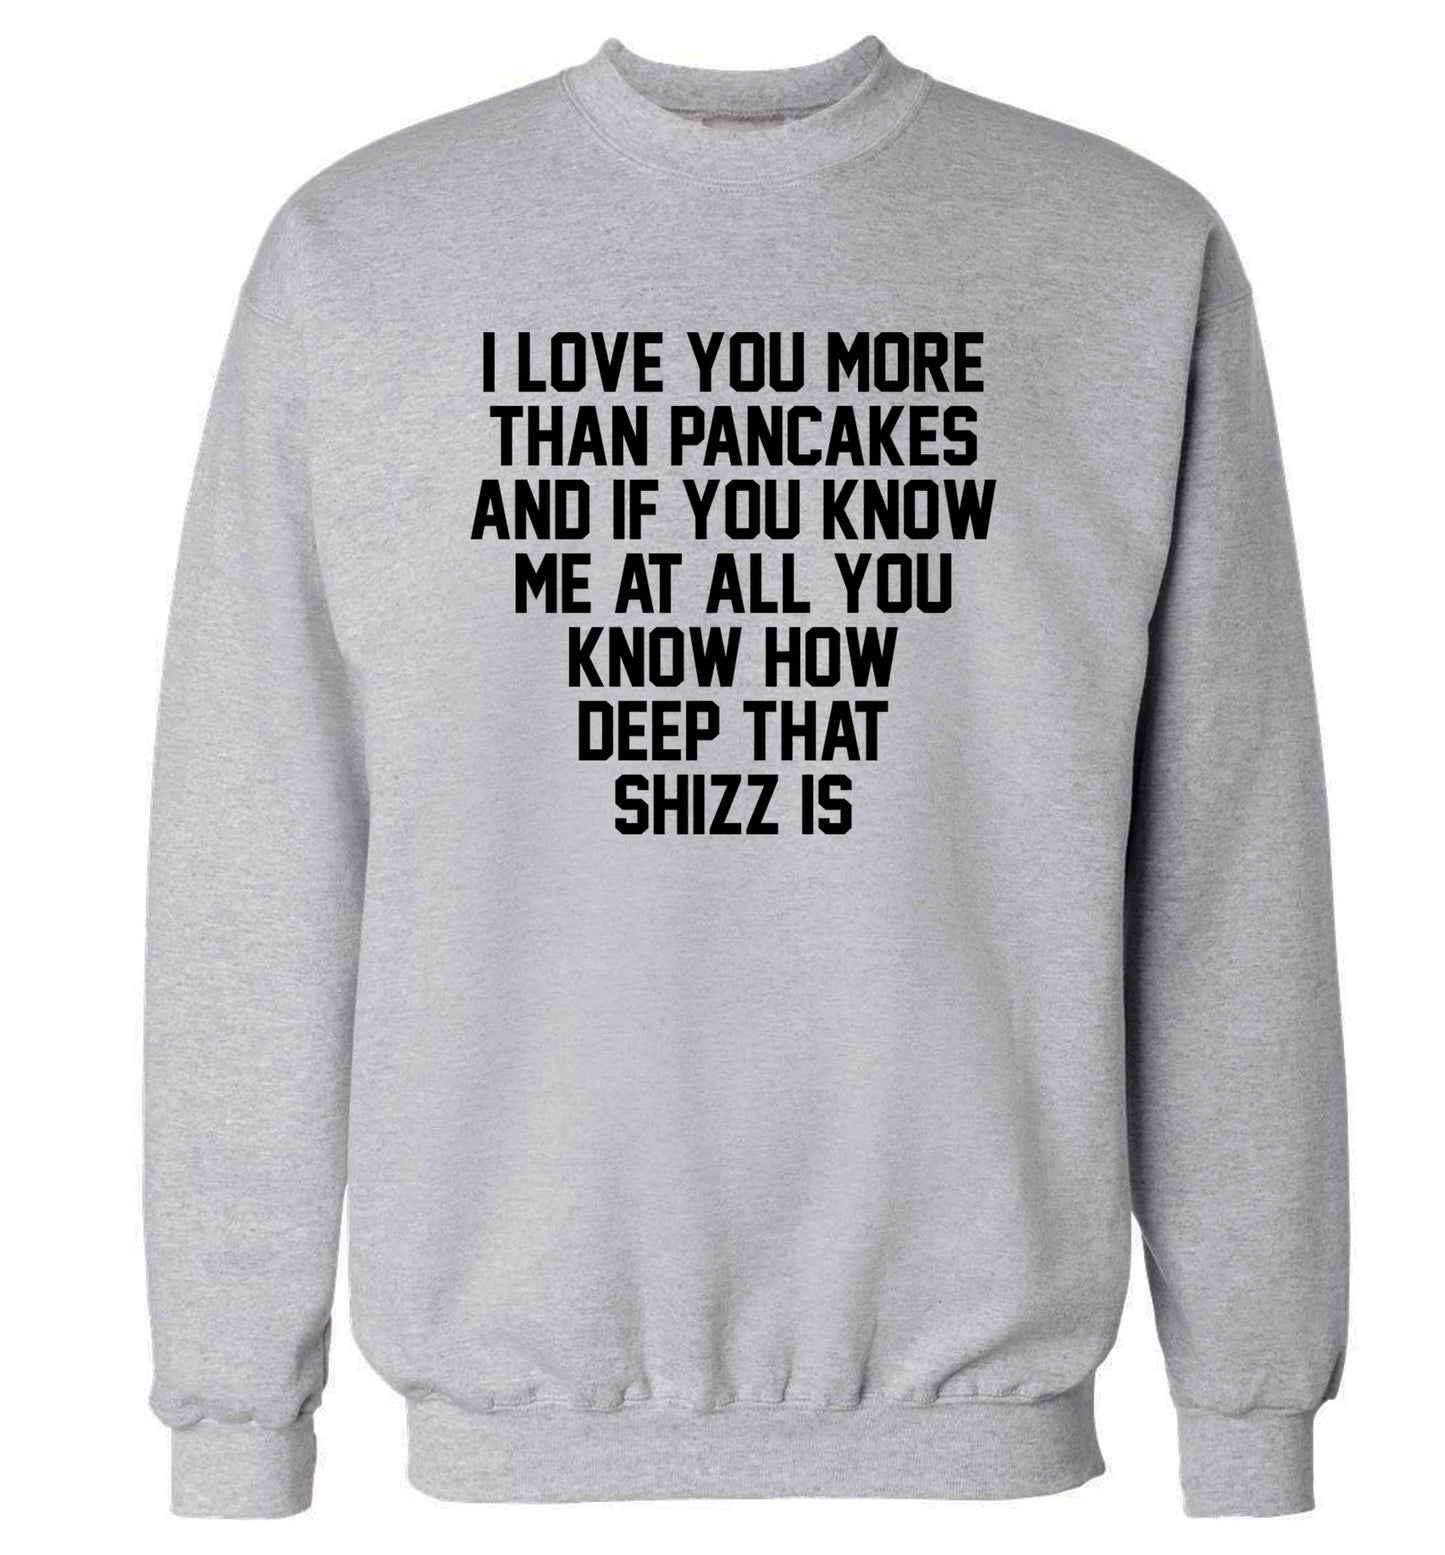 I love you more than pancakes and if you know me at all you know how deep that shizz is adult's unisex grey sweater 2XL